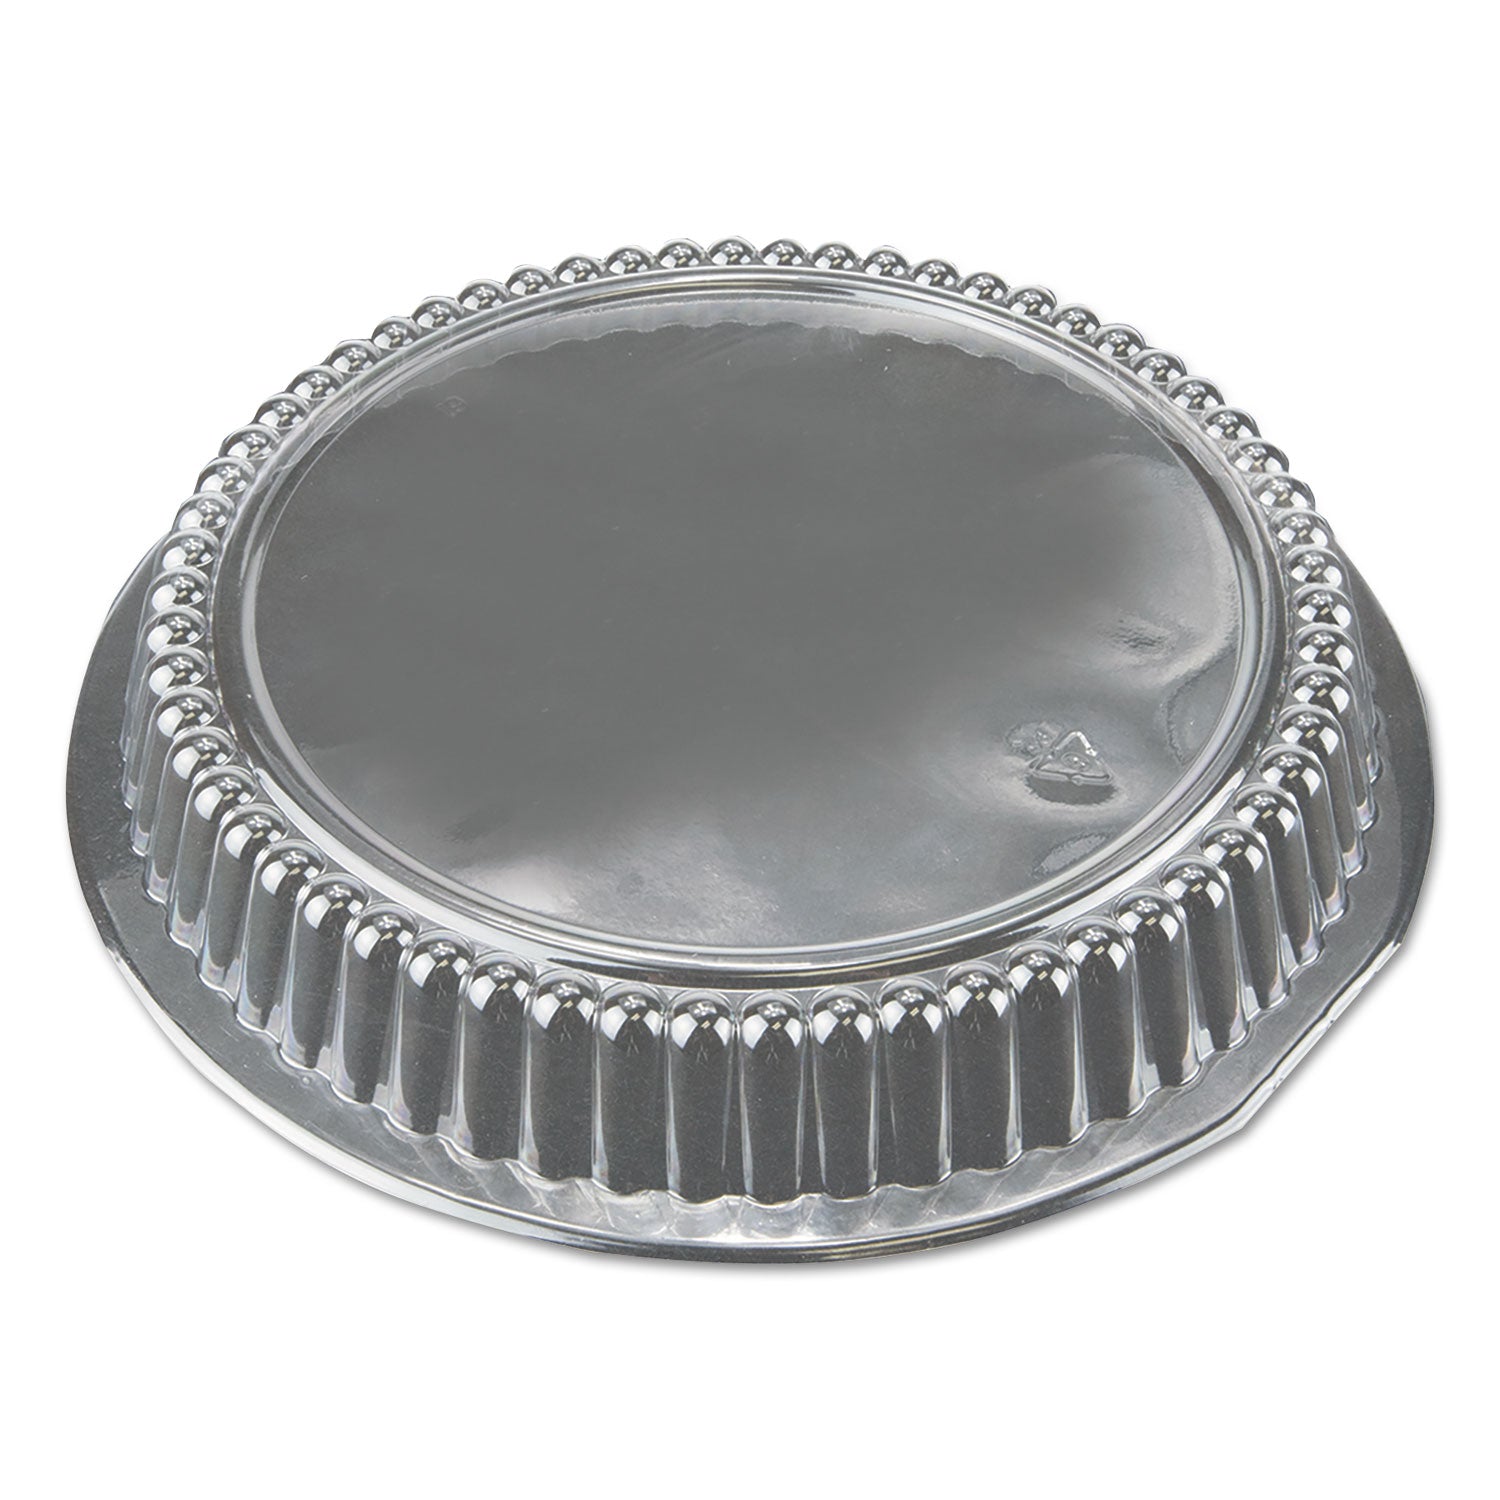 dome-lids-for-7-round-containers-7-diameter-clear-plastic-500-carton_dpkp270500 - 1